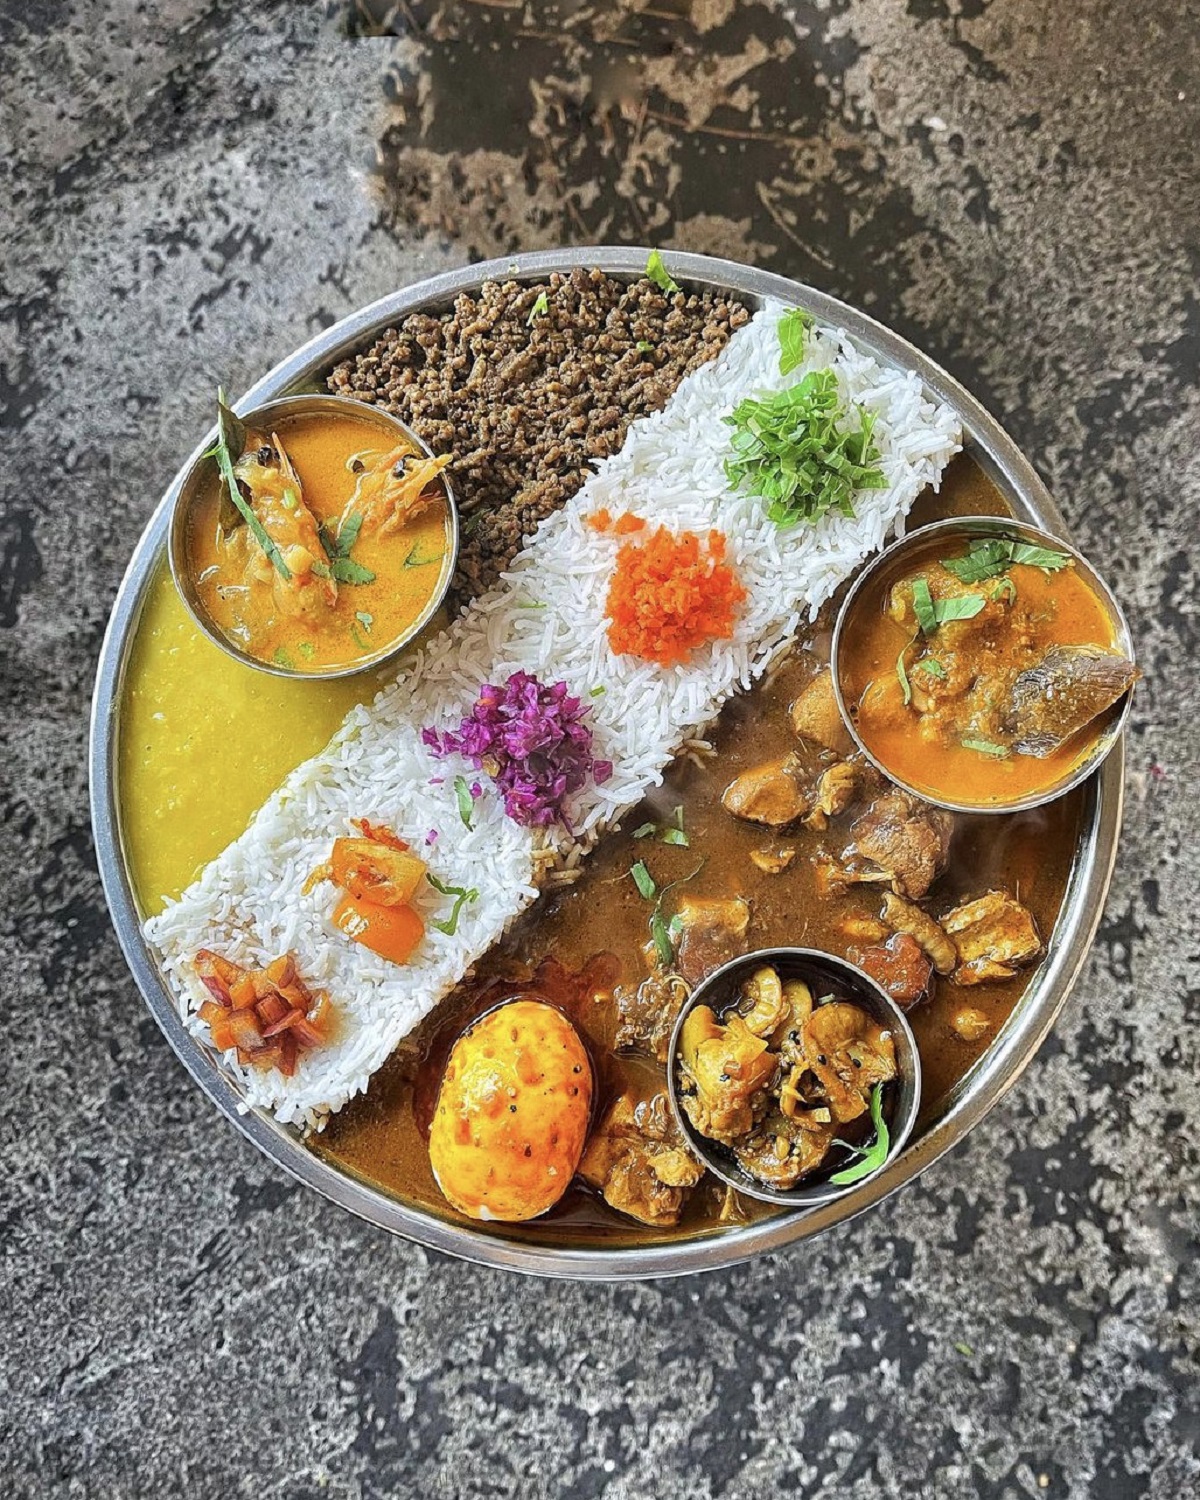 Amazing Curry Platter At My Local Curry Shop